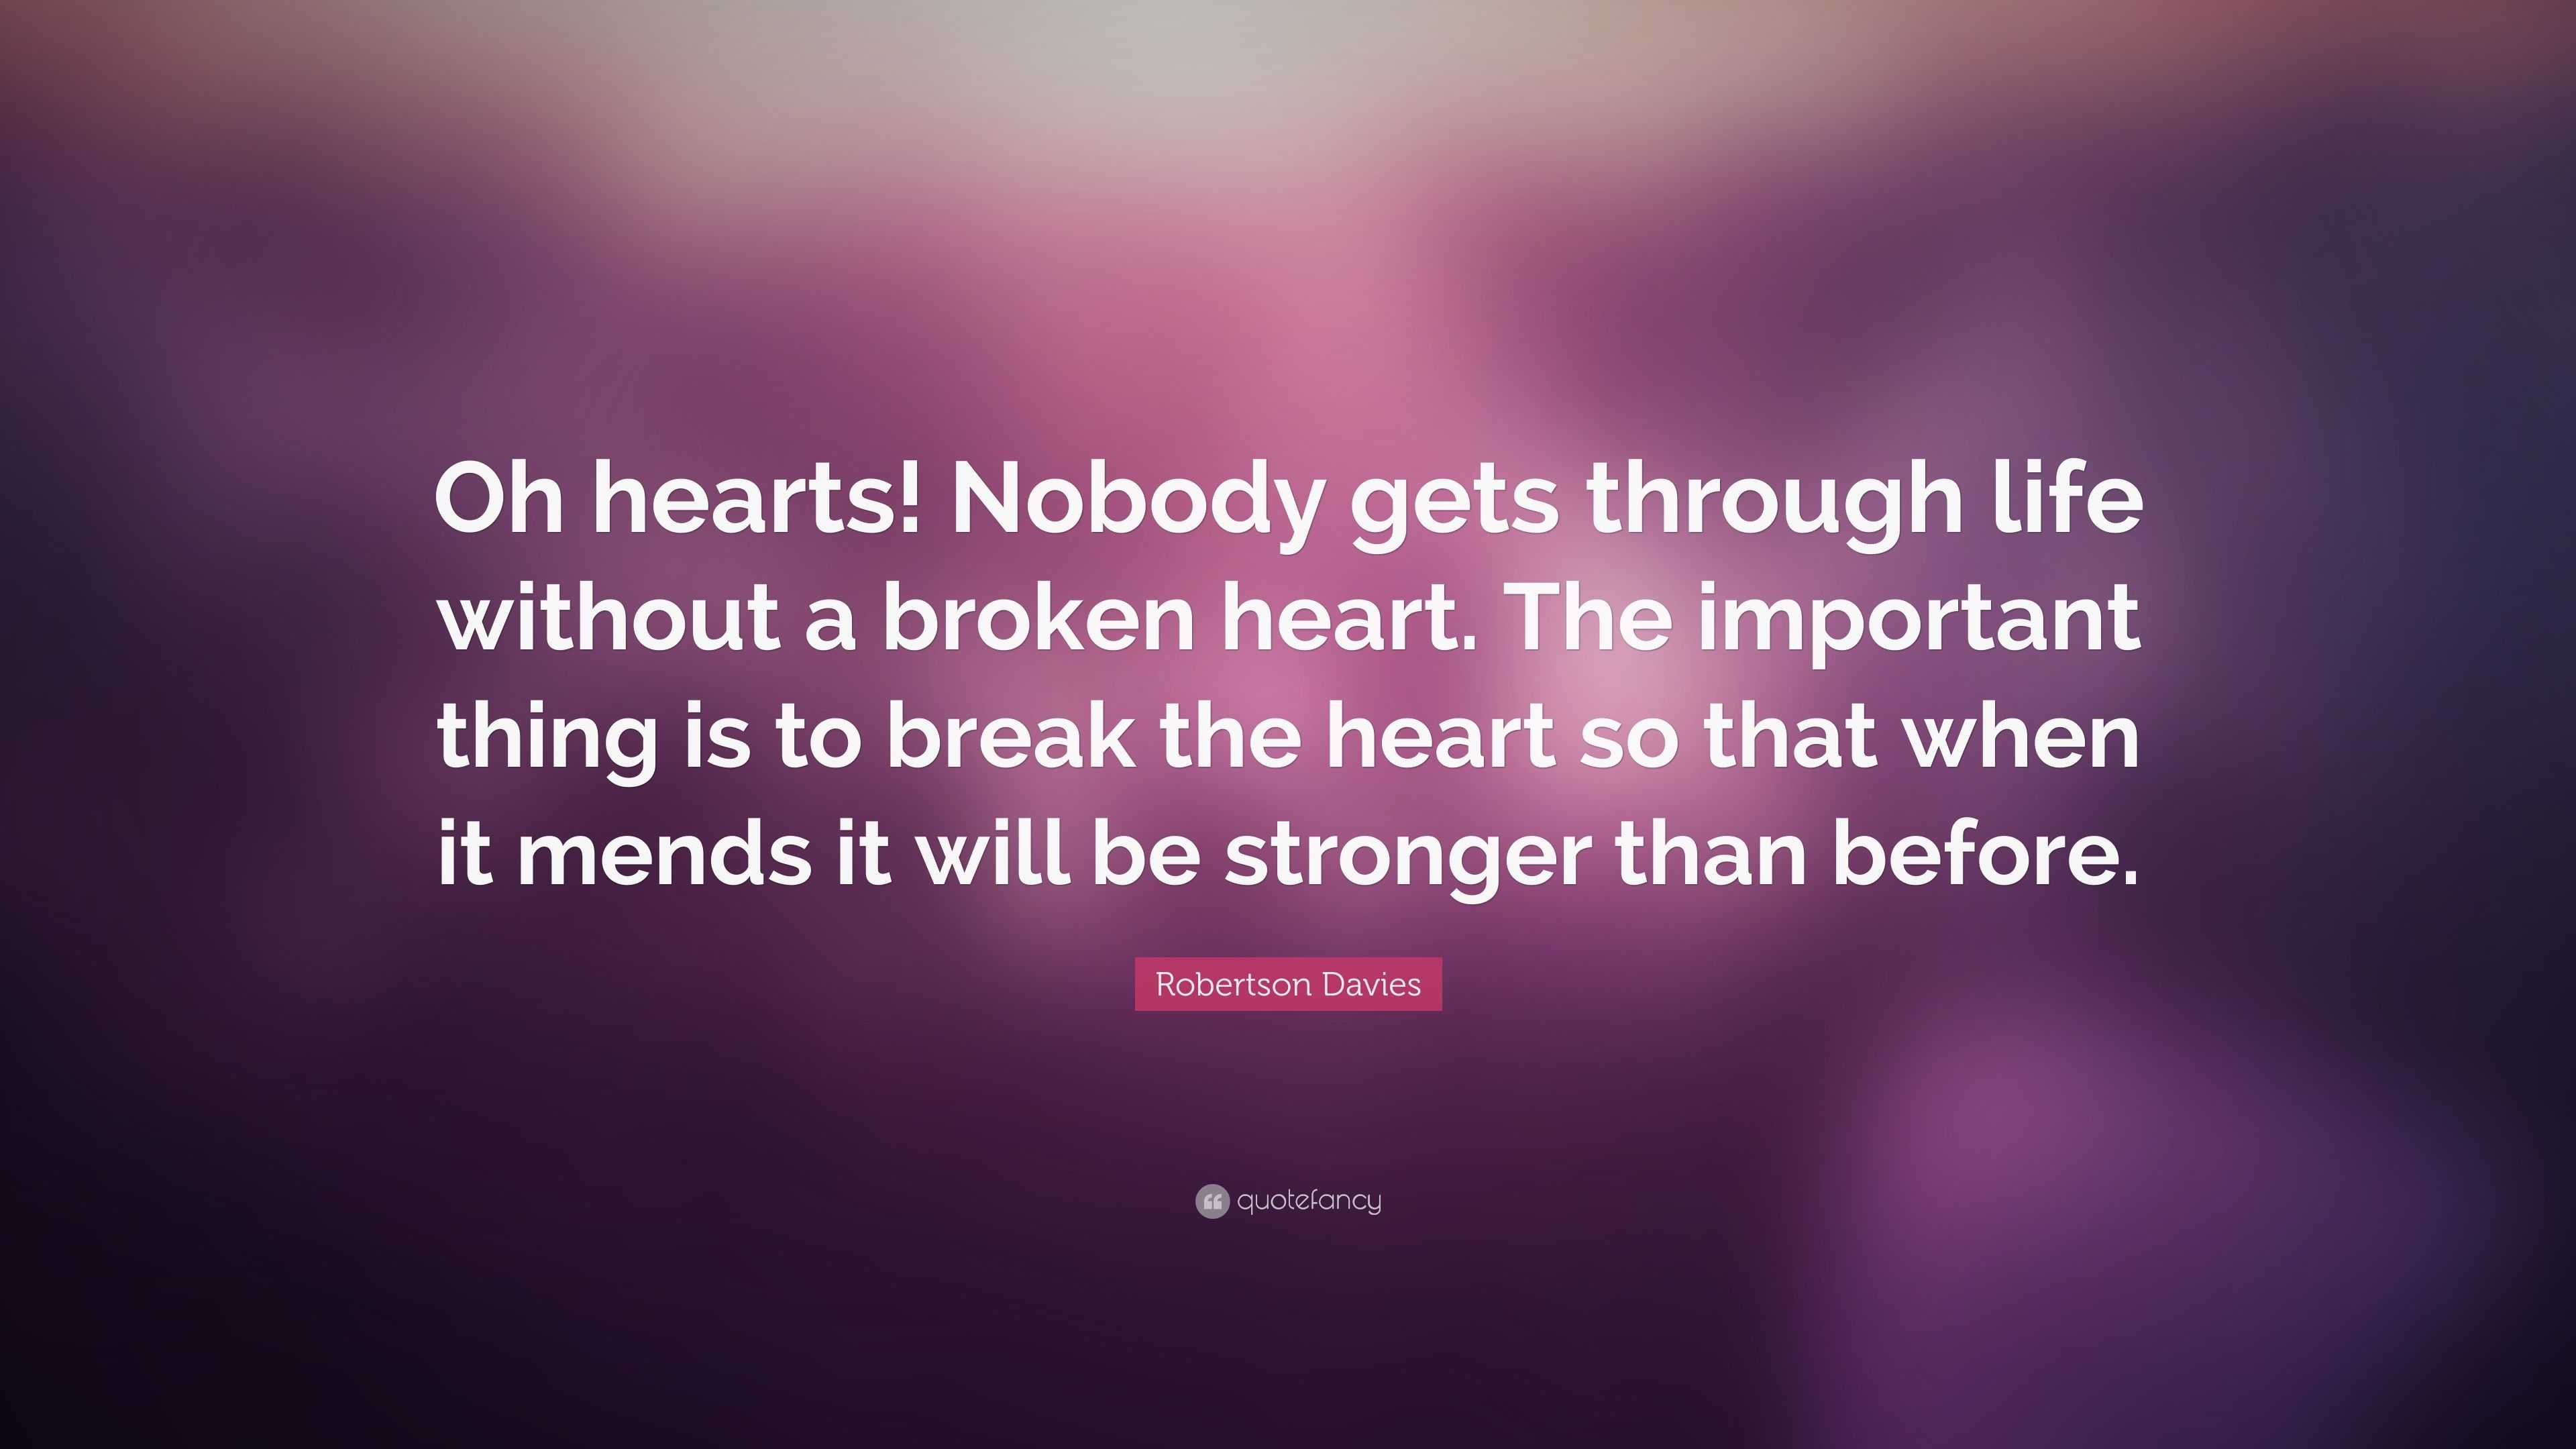 Robertson Davies Quote: “Oh hearts! Nobody gets through life without a ...